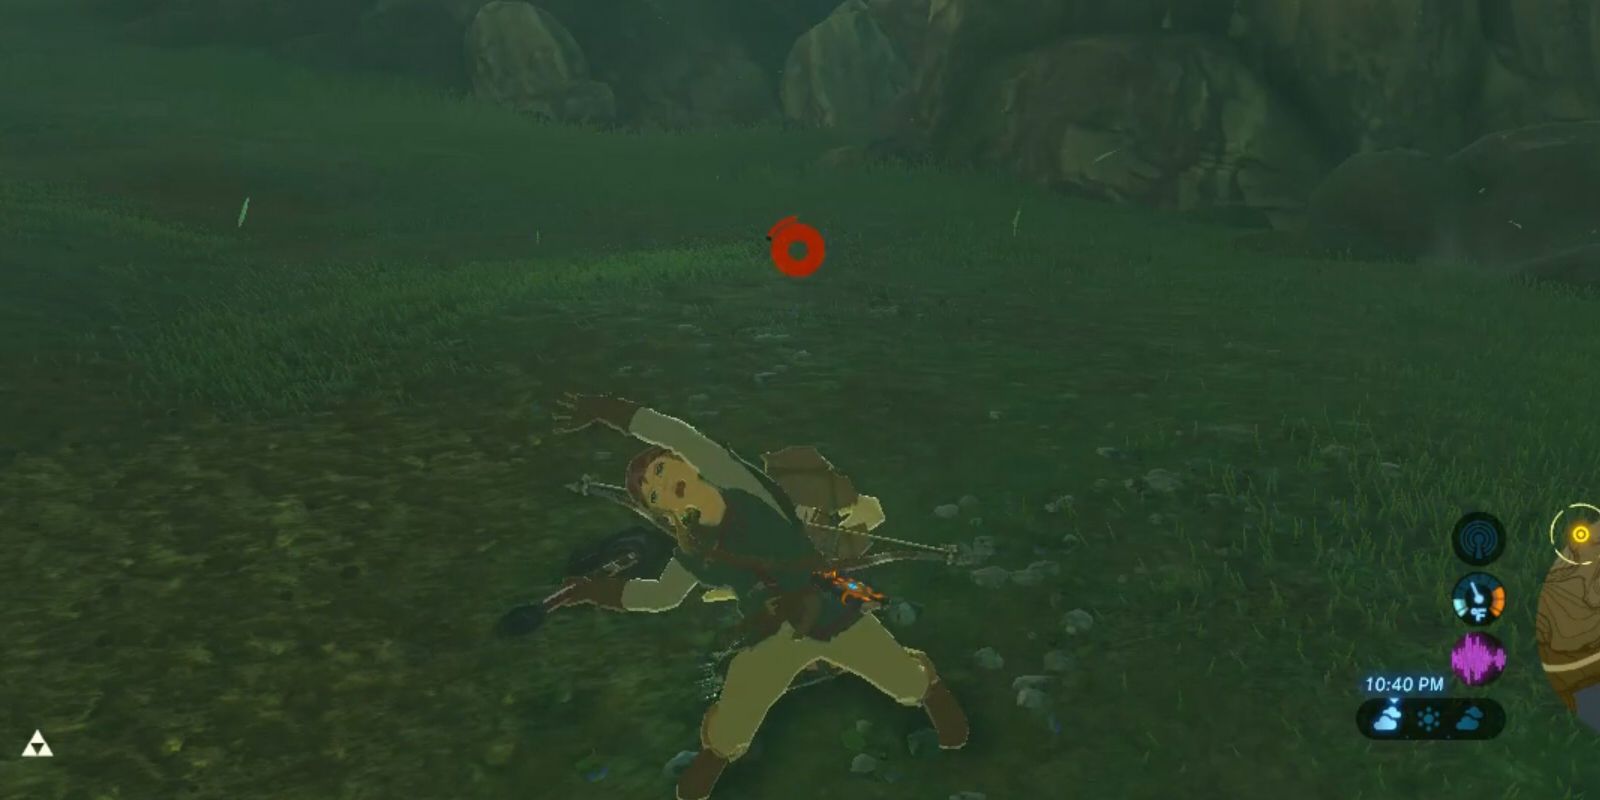 BOTW's Subtle Attack Animation Blows Players Minds 4 Years Later